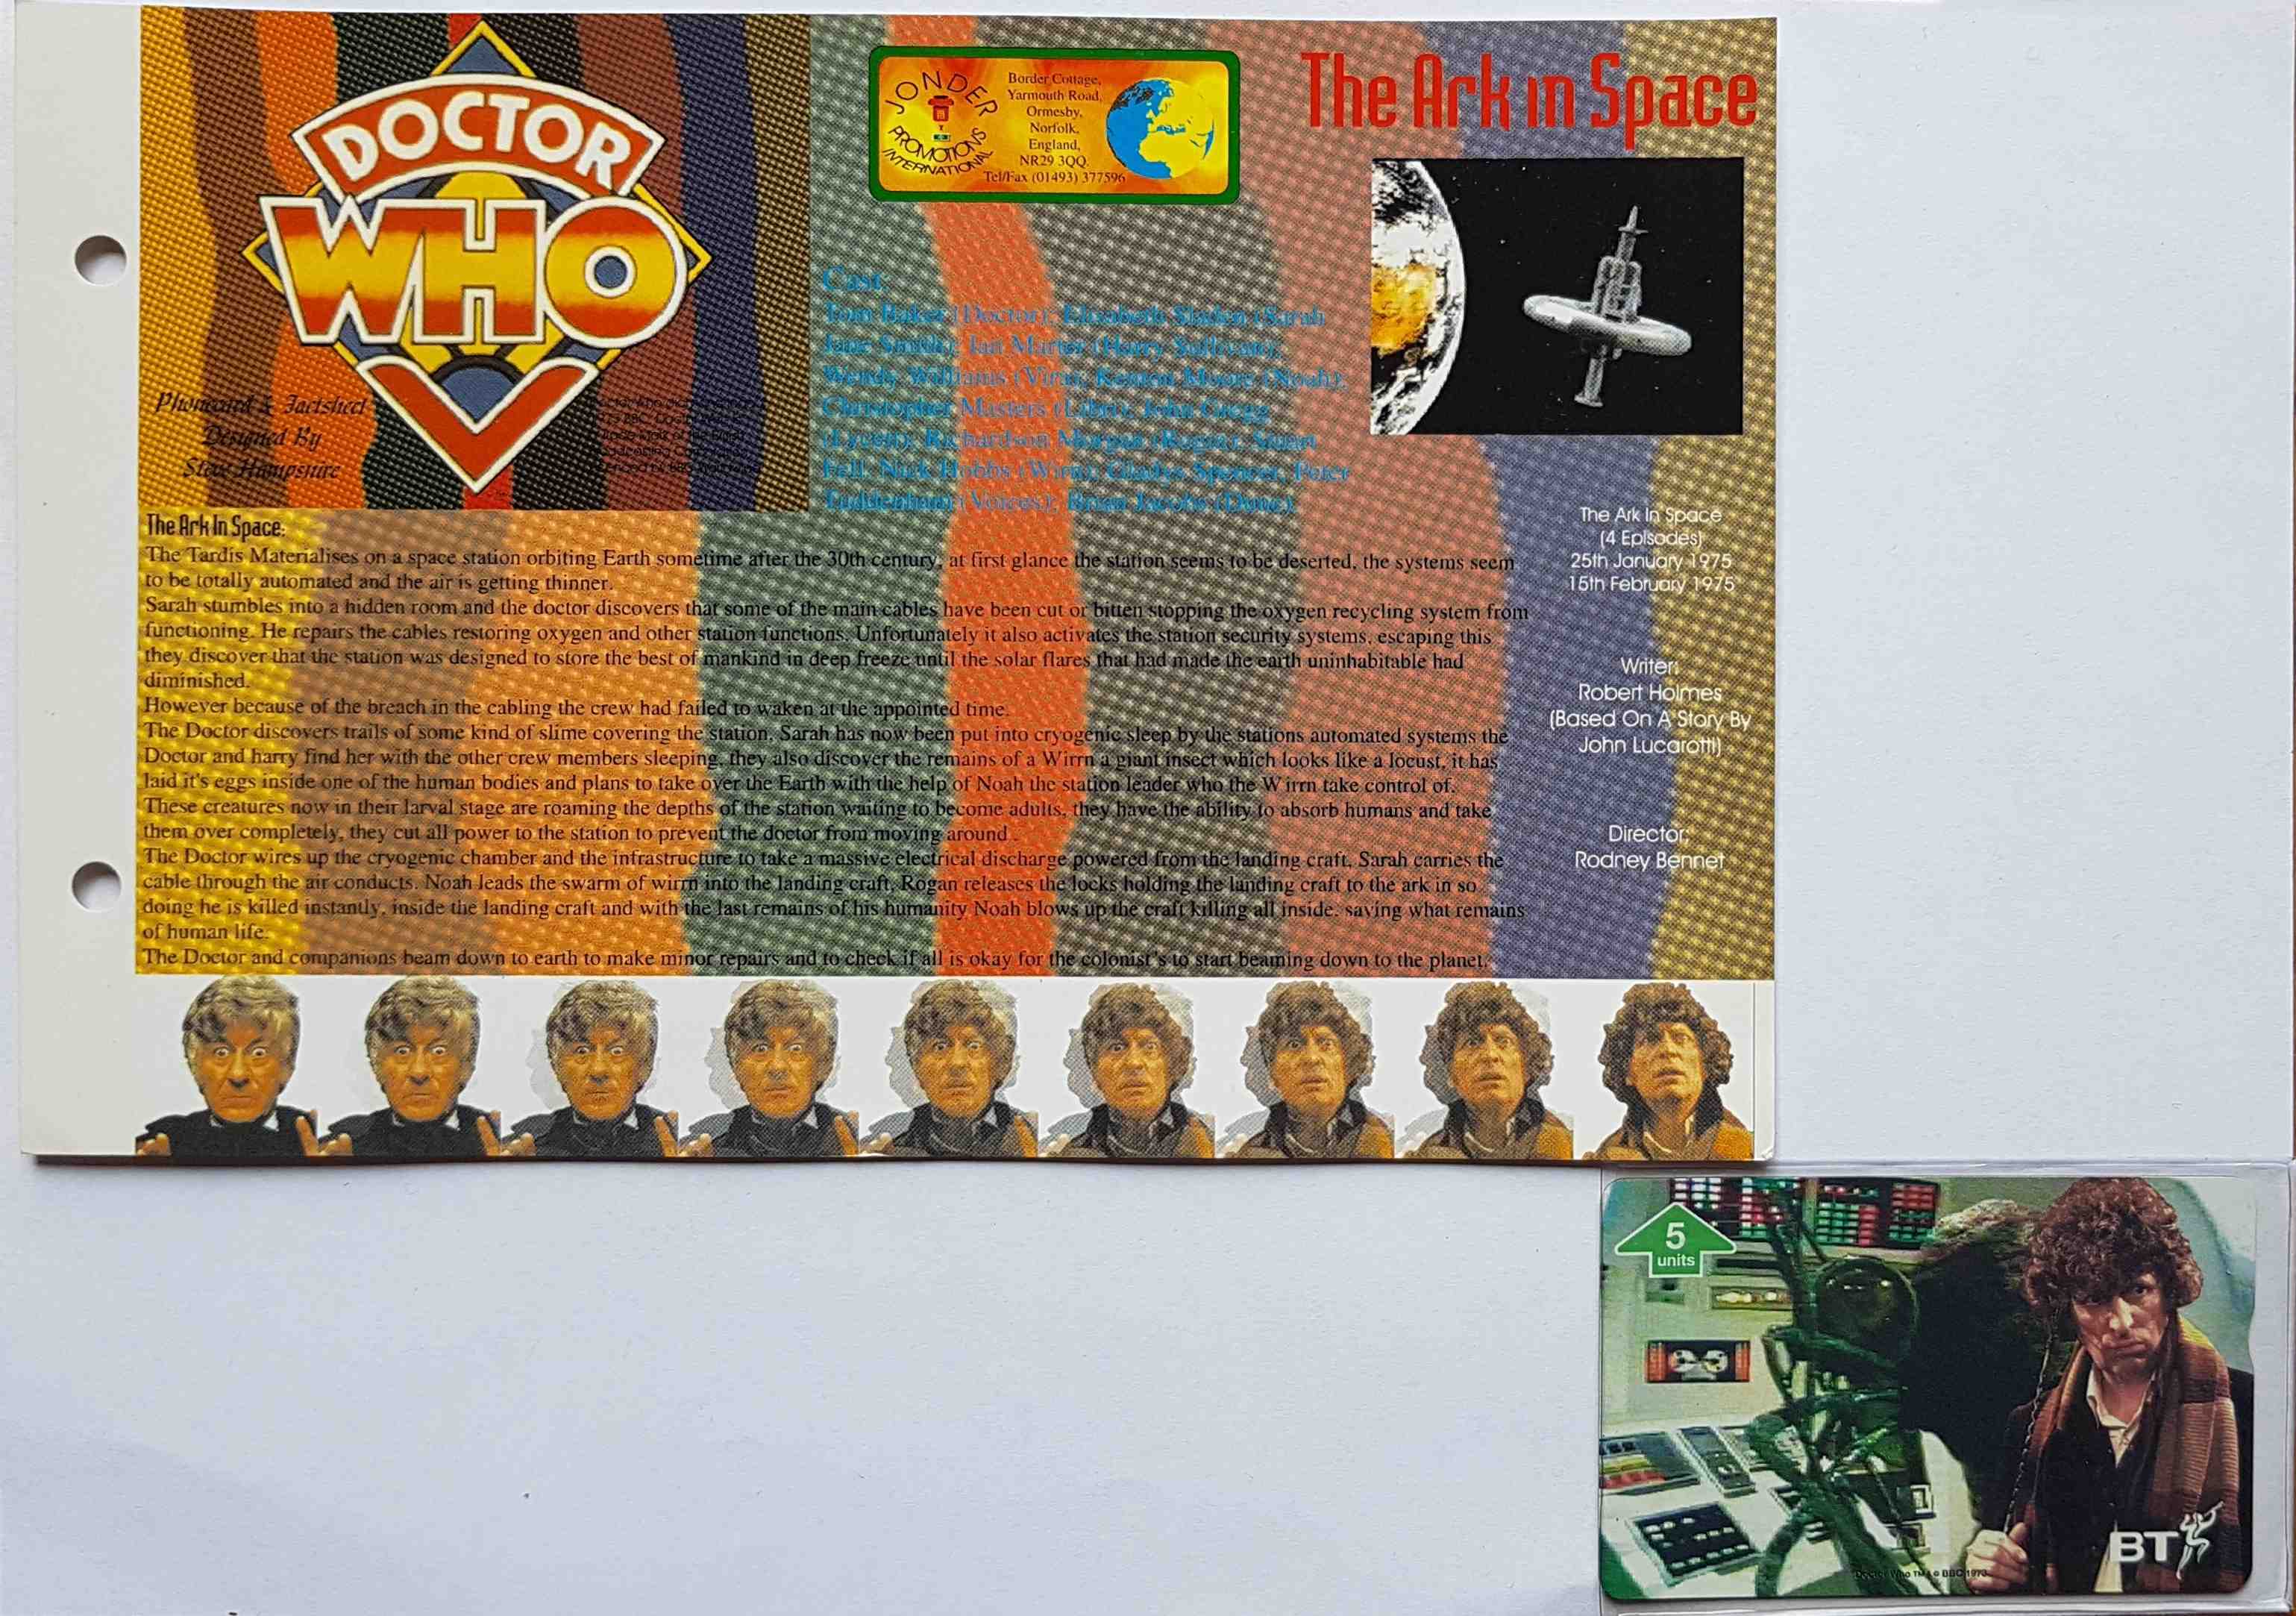 Picture of PC-BTG698 Doctor Who - The ark in space - Phone card by artist  from the BBC records and Tapes library